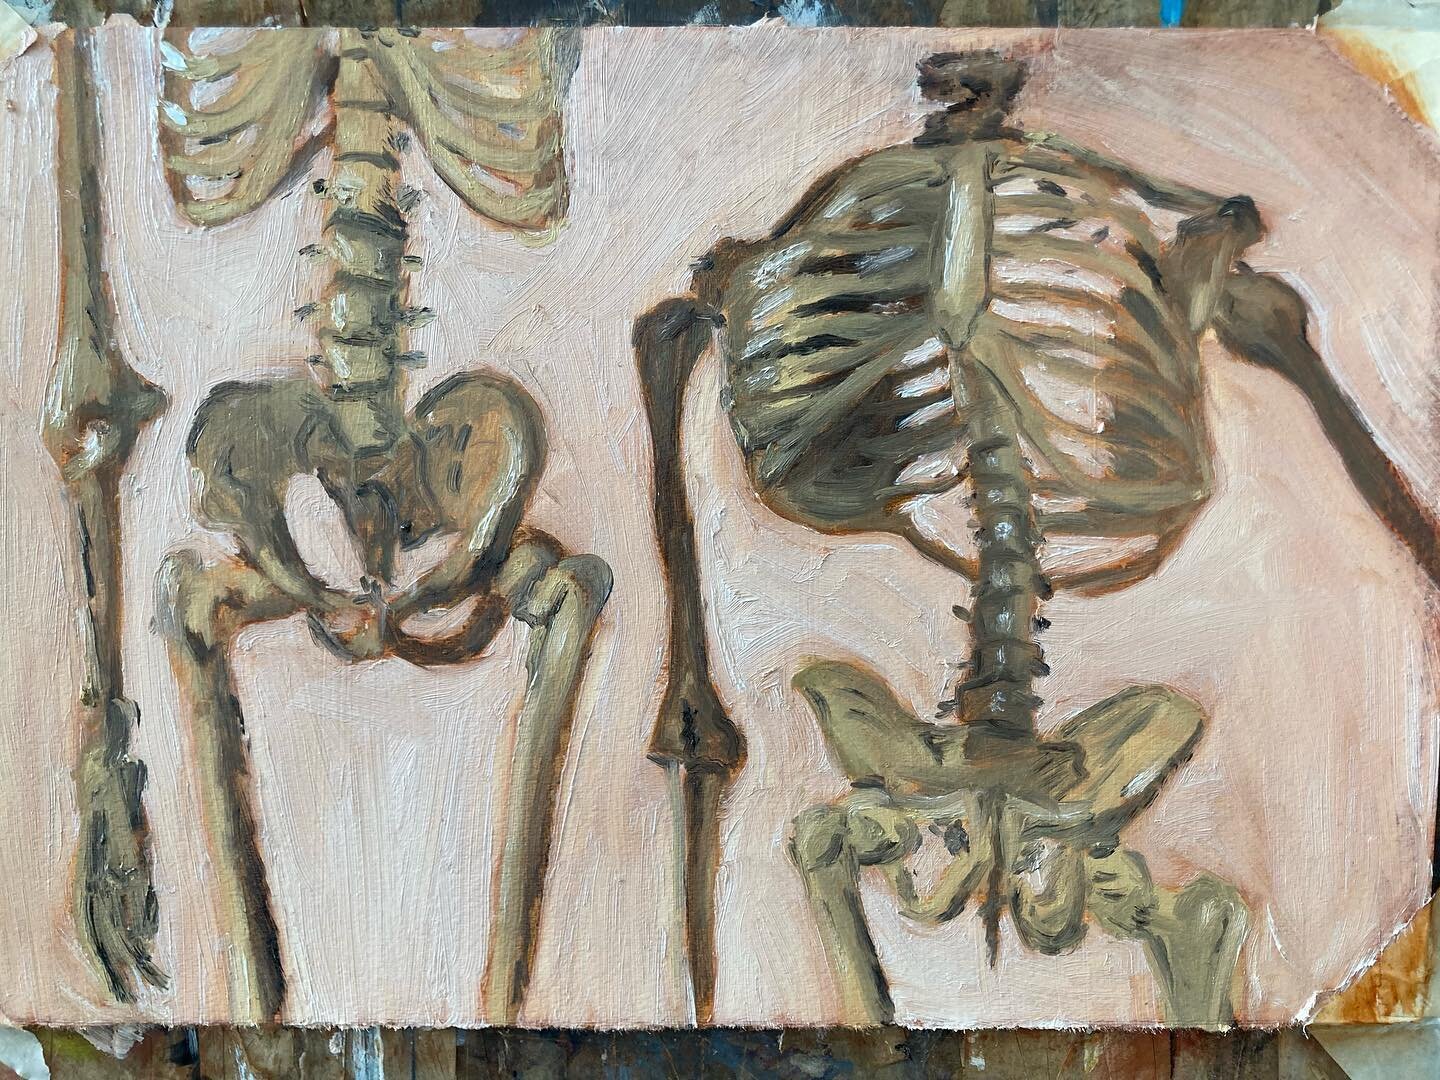 A study of two skeletons. 
Something about this I enjoyed, having a very specific study of bones but also keeping it stylized and working with color